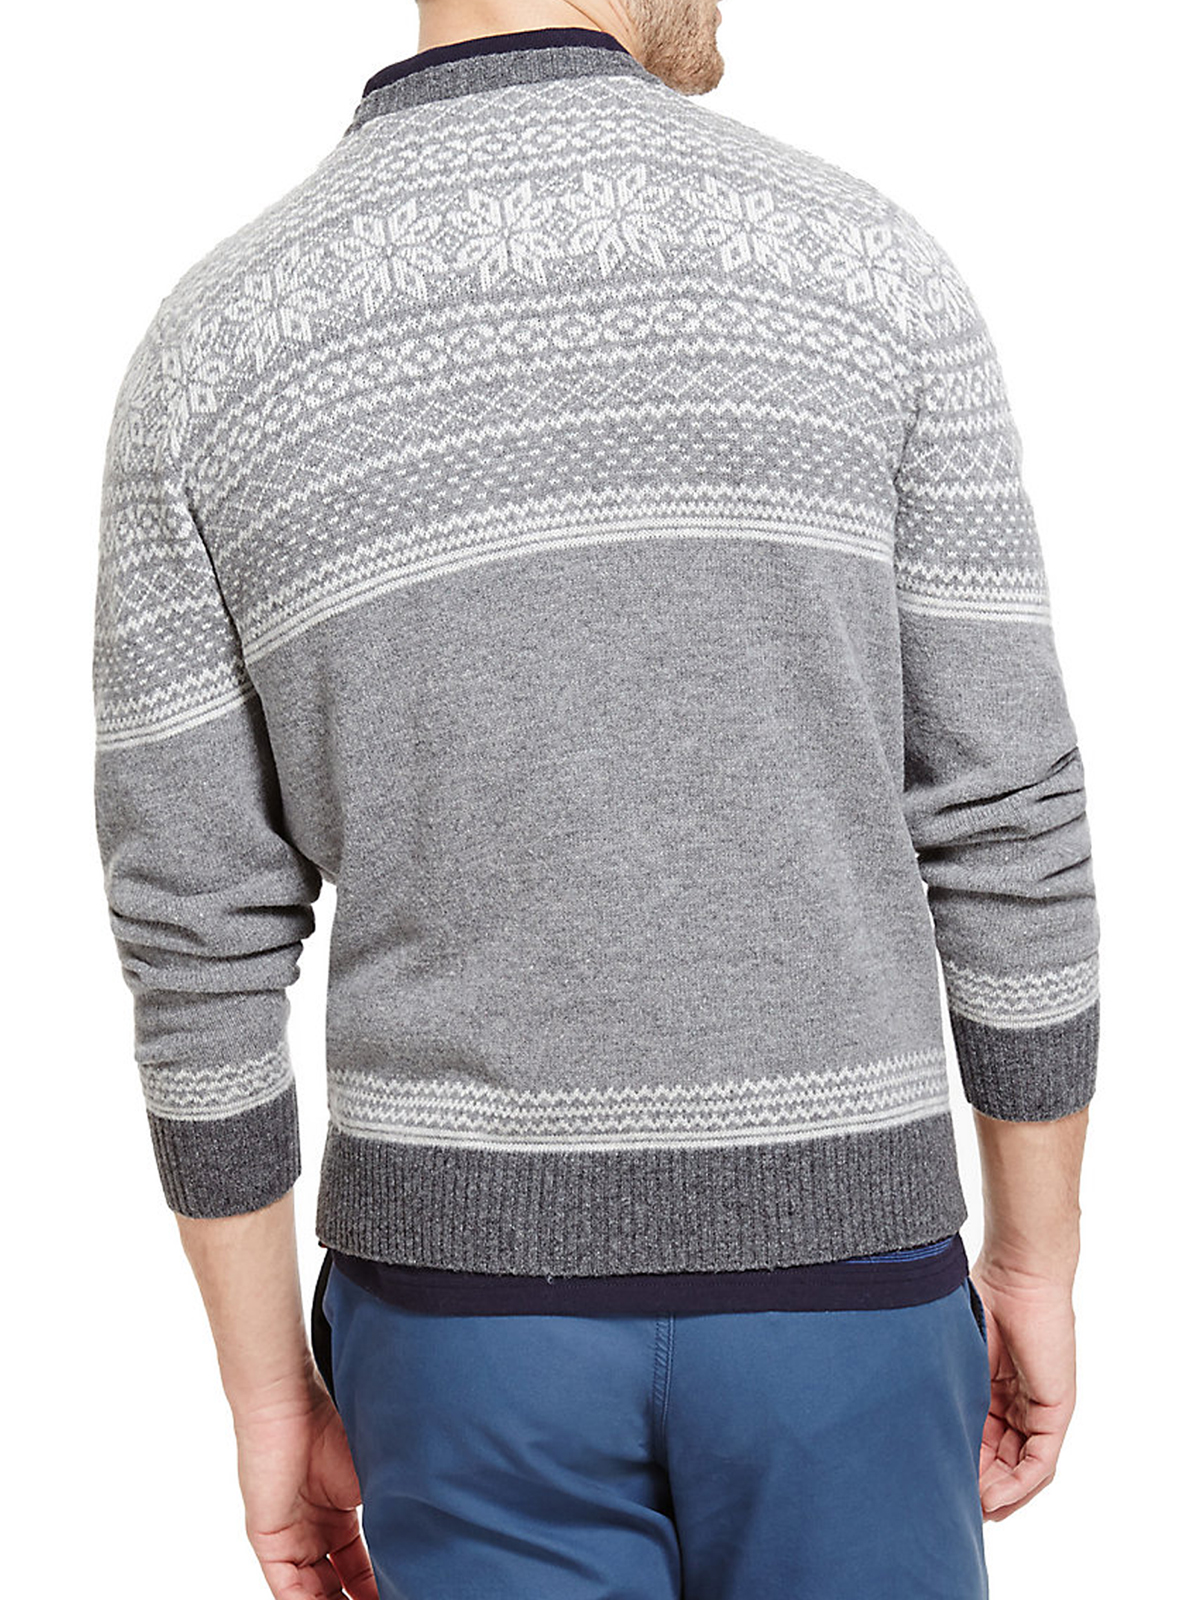 Marks and Spencer - - M&5 GREY-MIX Lambswool Rich Sporty Fair Isle Crew ...